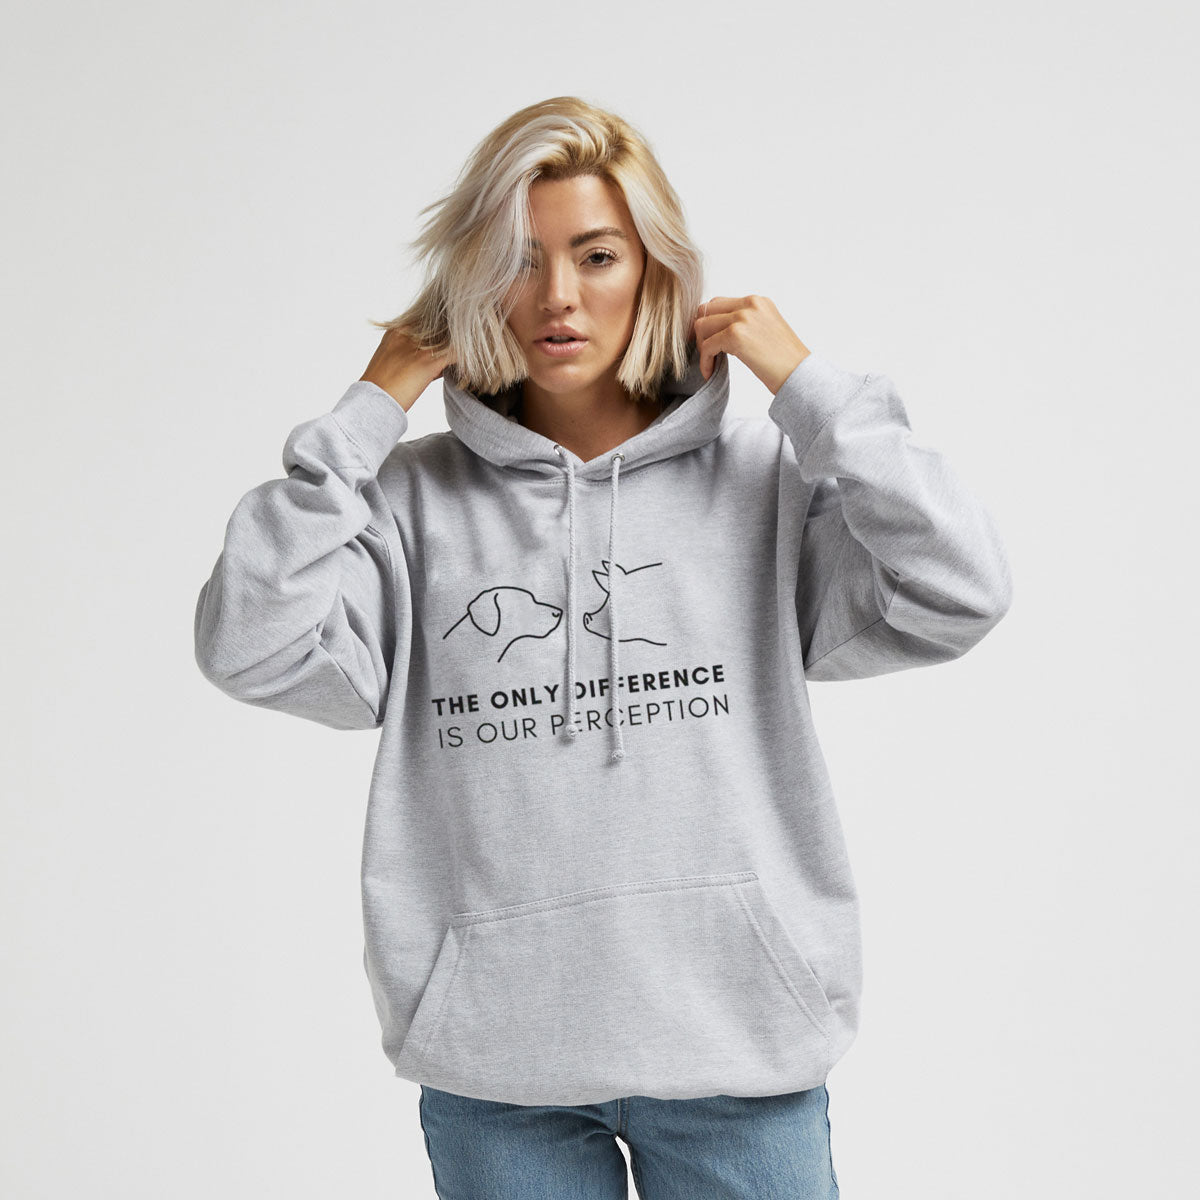 The Only Difference Is Perception Ethical Vegan Hoodie (Unisex) product